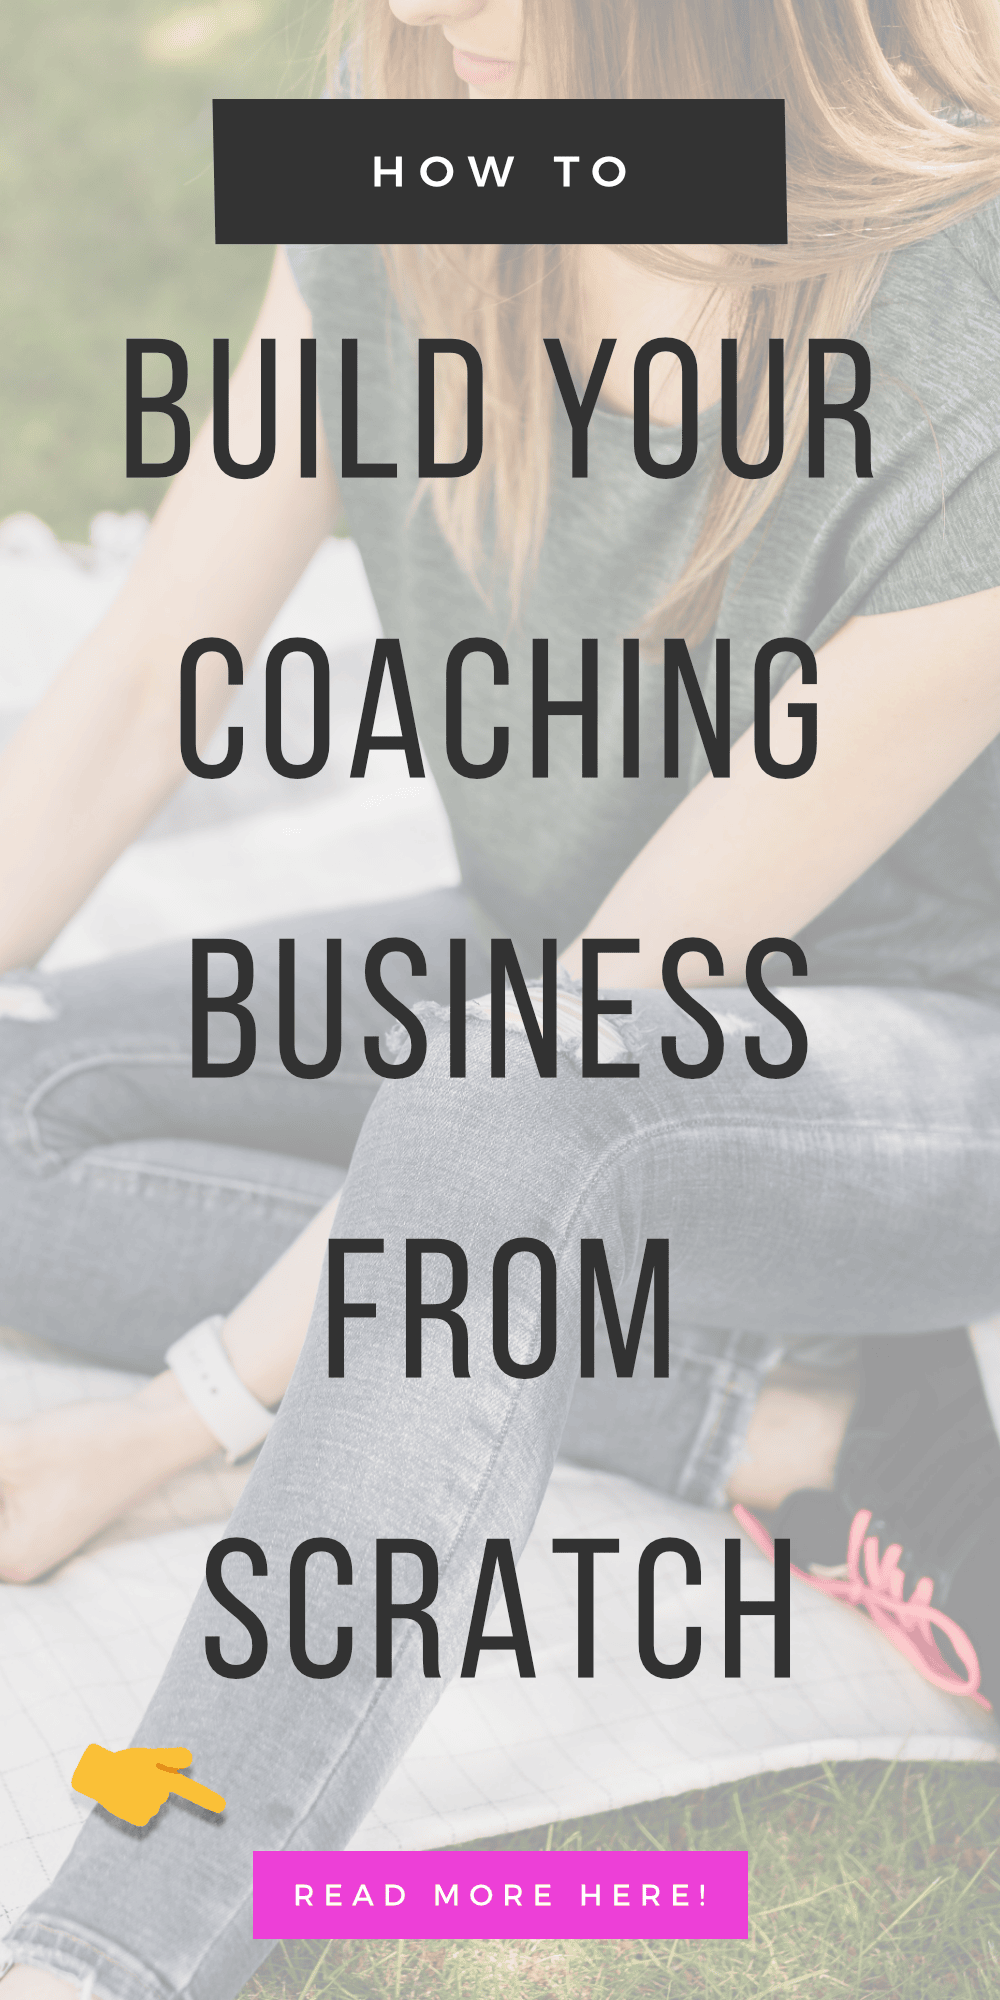 How To Build Your Coaching Business From Scratch